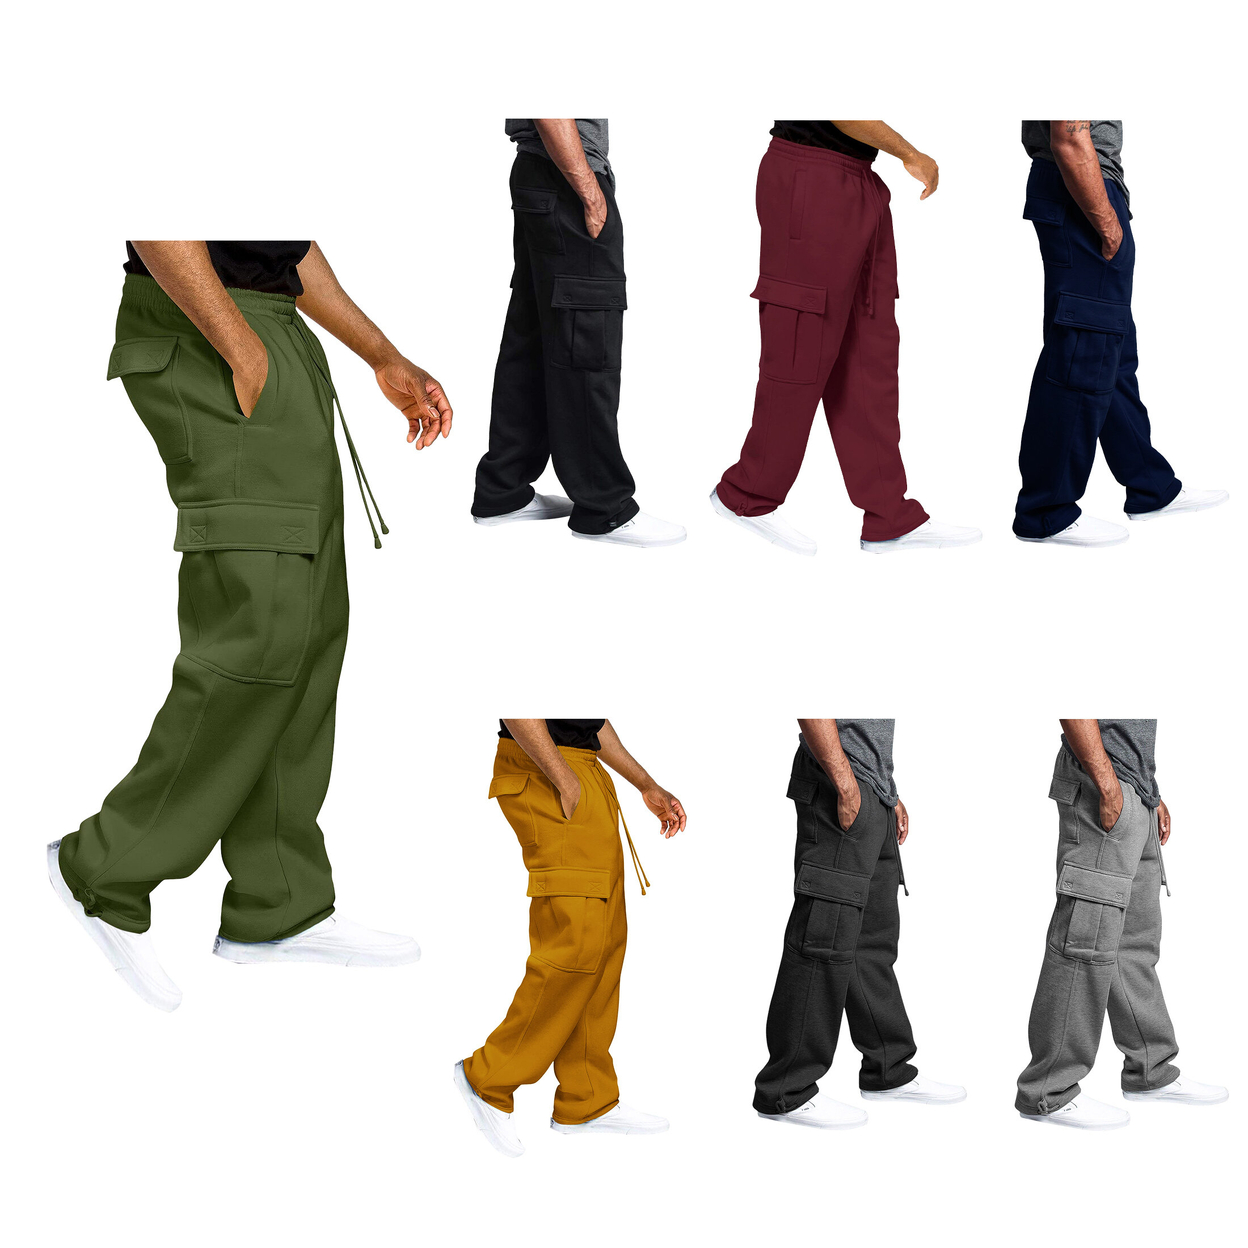 Men's Soft Casual Solid Fleece Lined Cargo Jogger Sweatpants With Pockets - Black, X-large